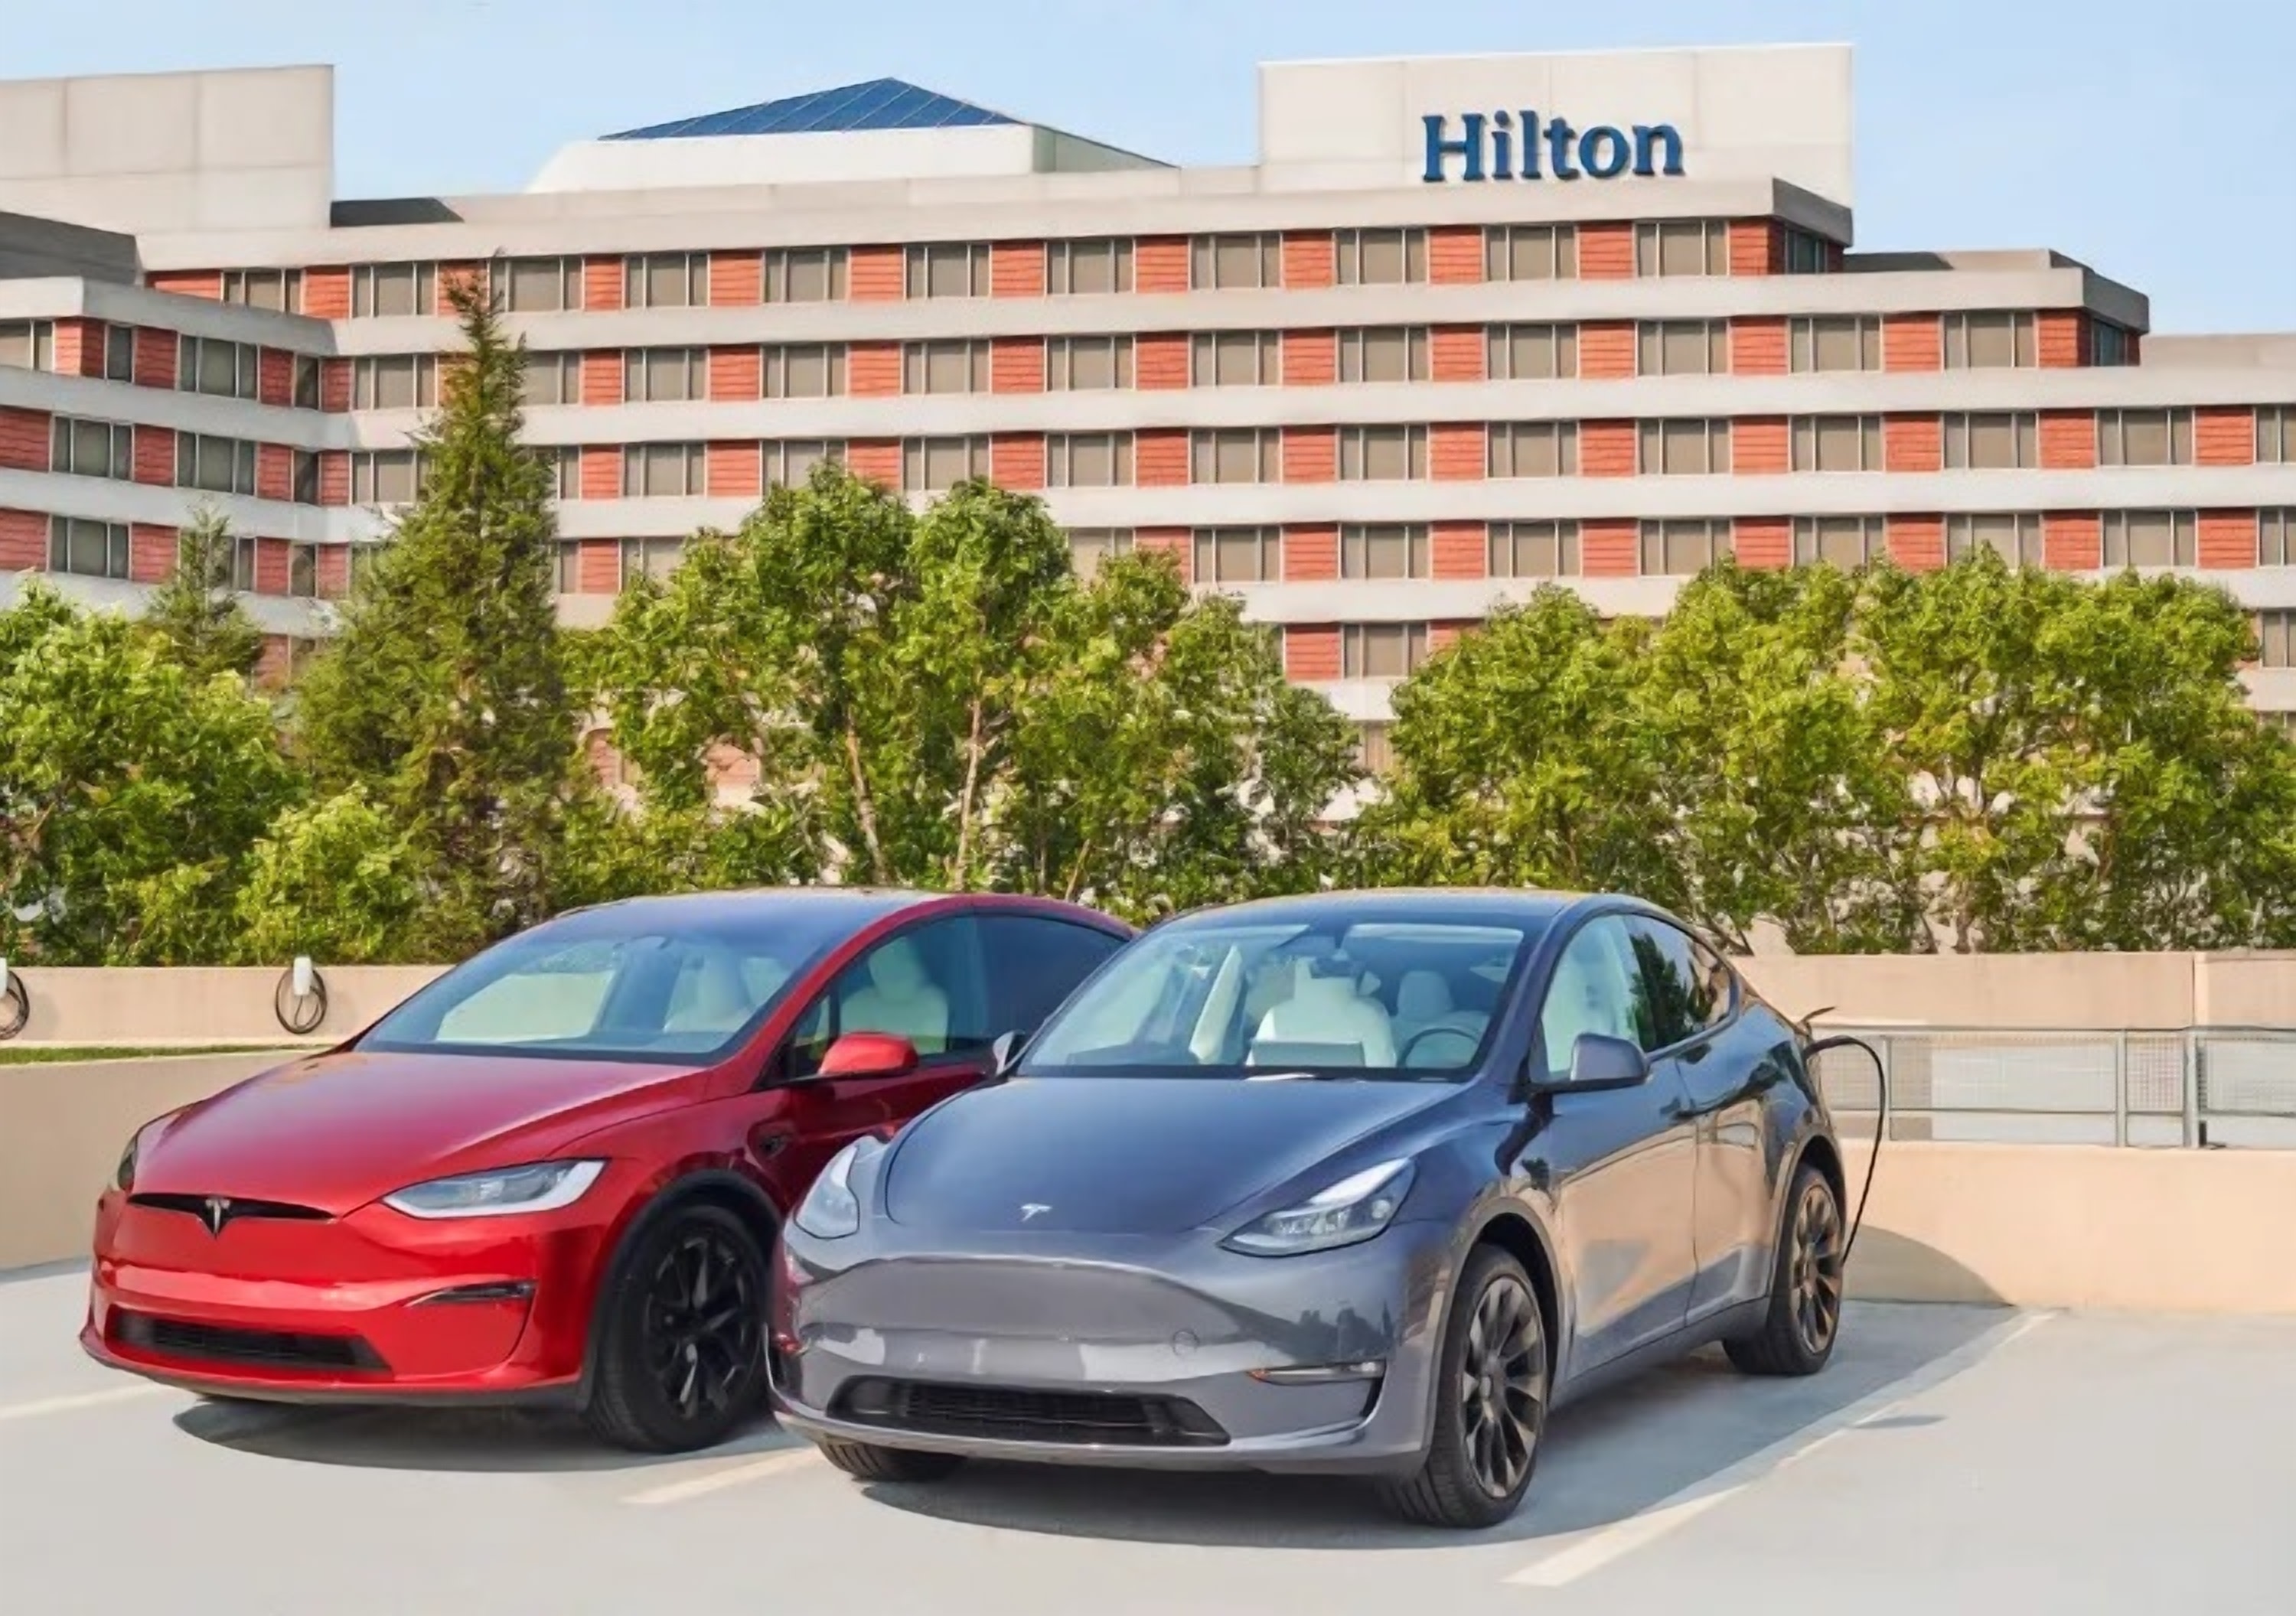 Hilton Partners with Tesla to Install 20,000 Chargers